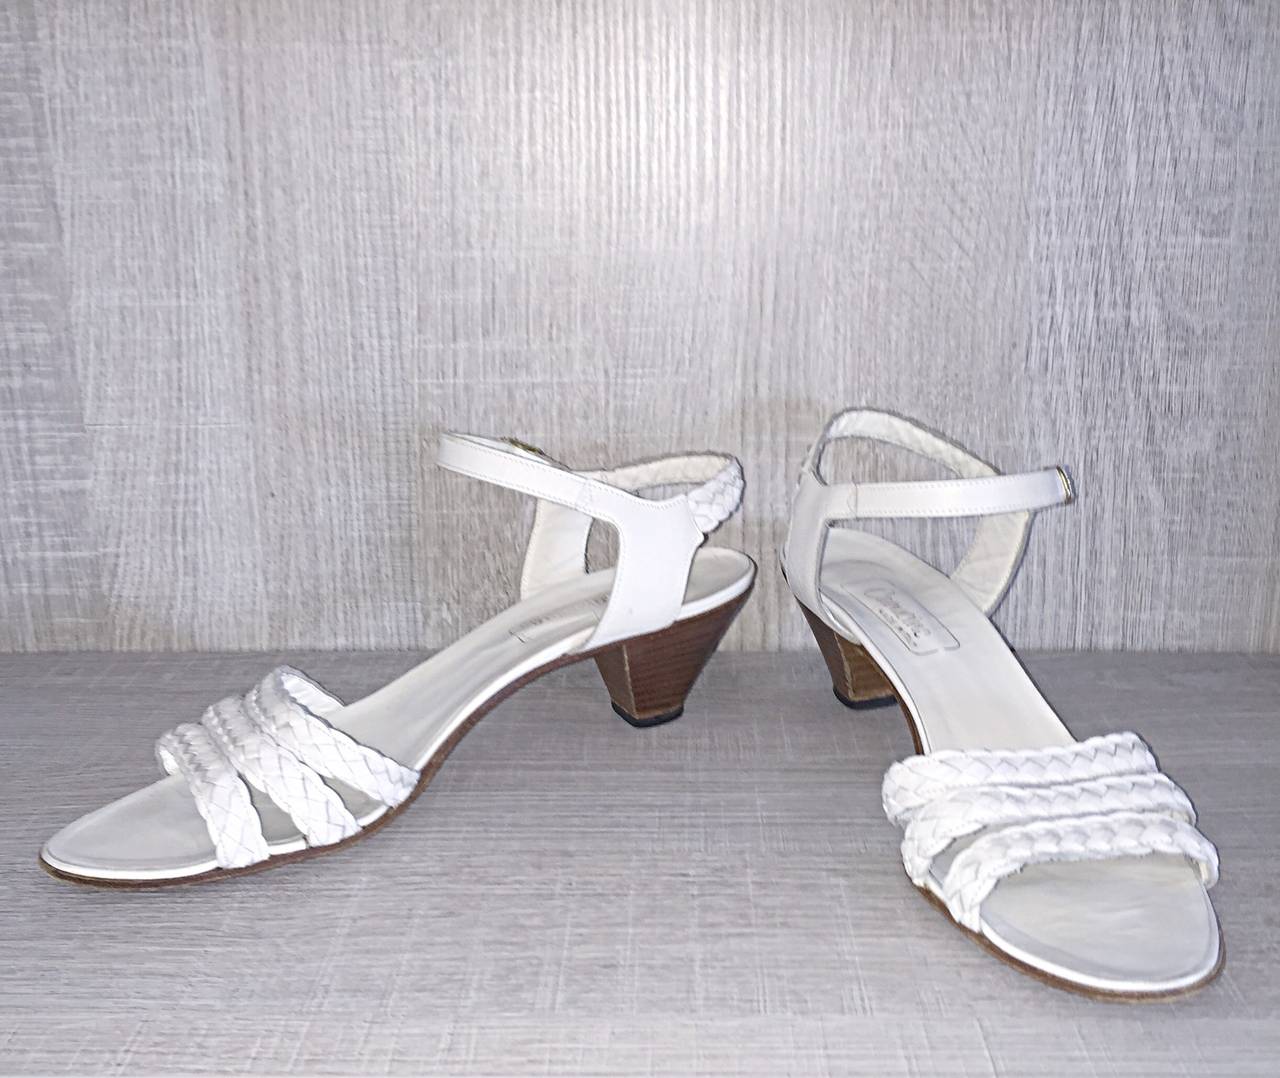 Women's 1960s Vintage Capucine Sz. 40 / 9.5 - 10 White Leather Sandals Heels Shoes Italy For Sale